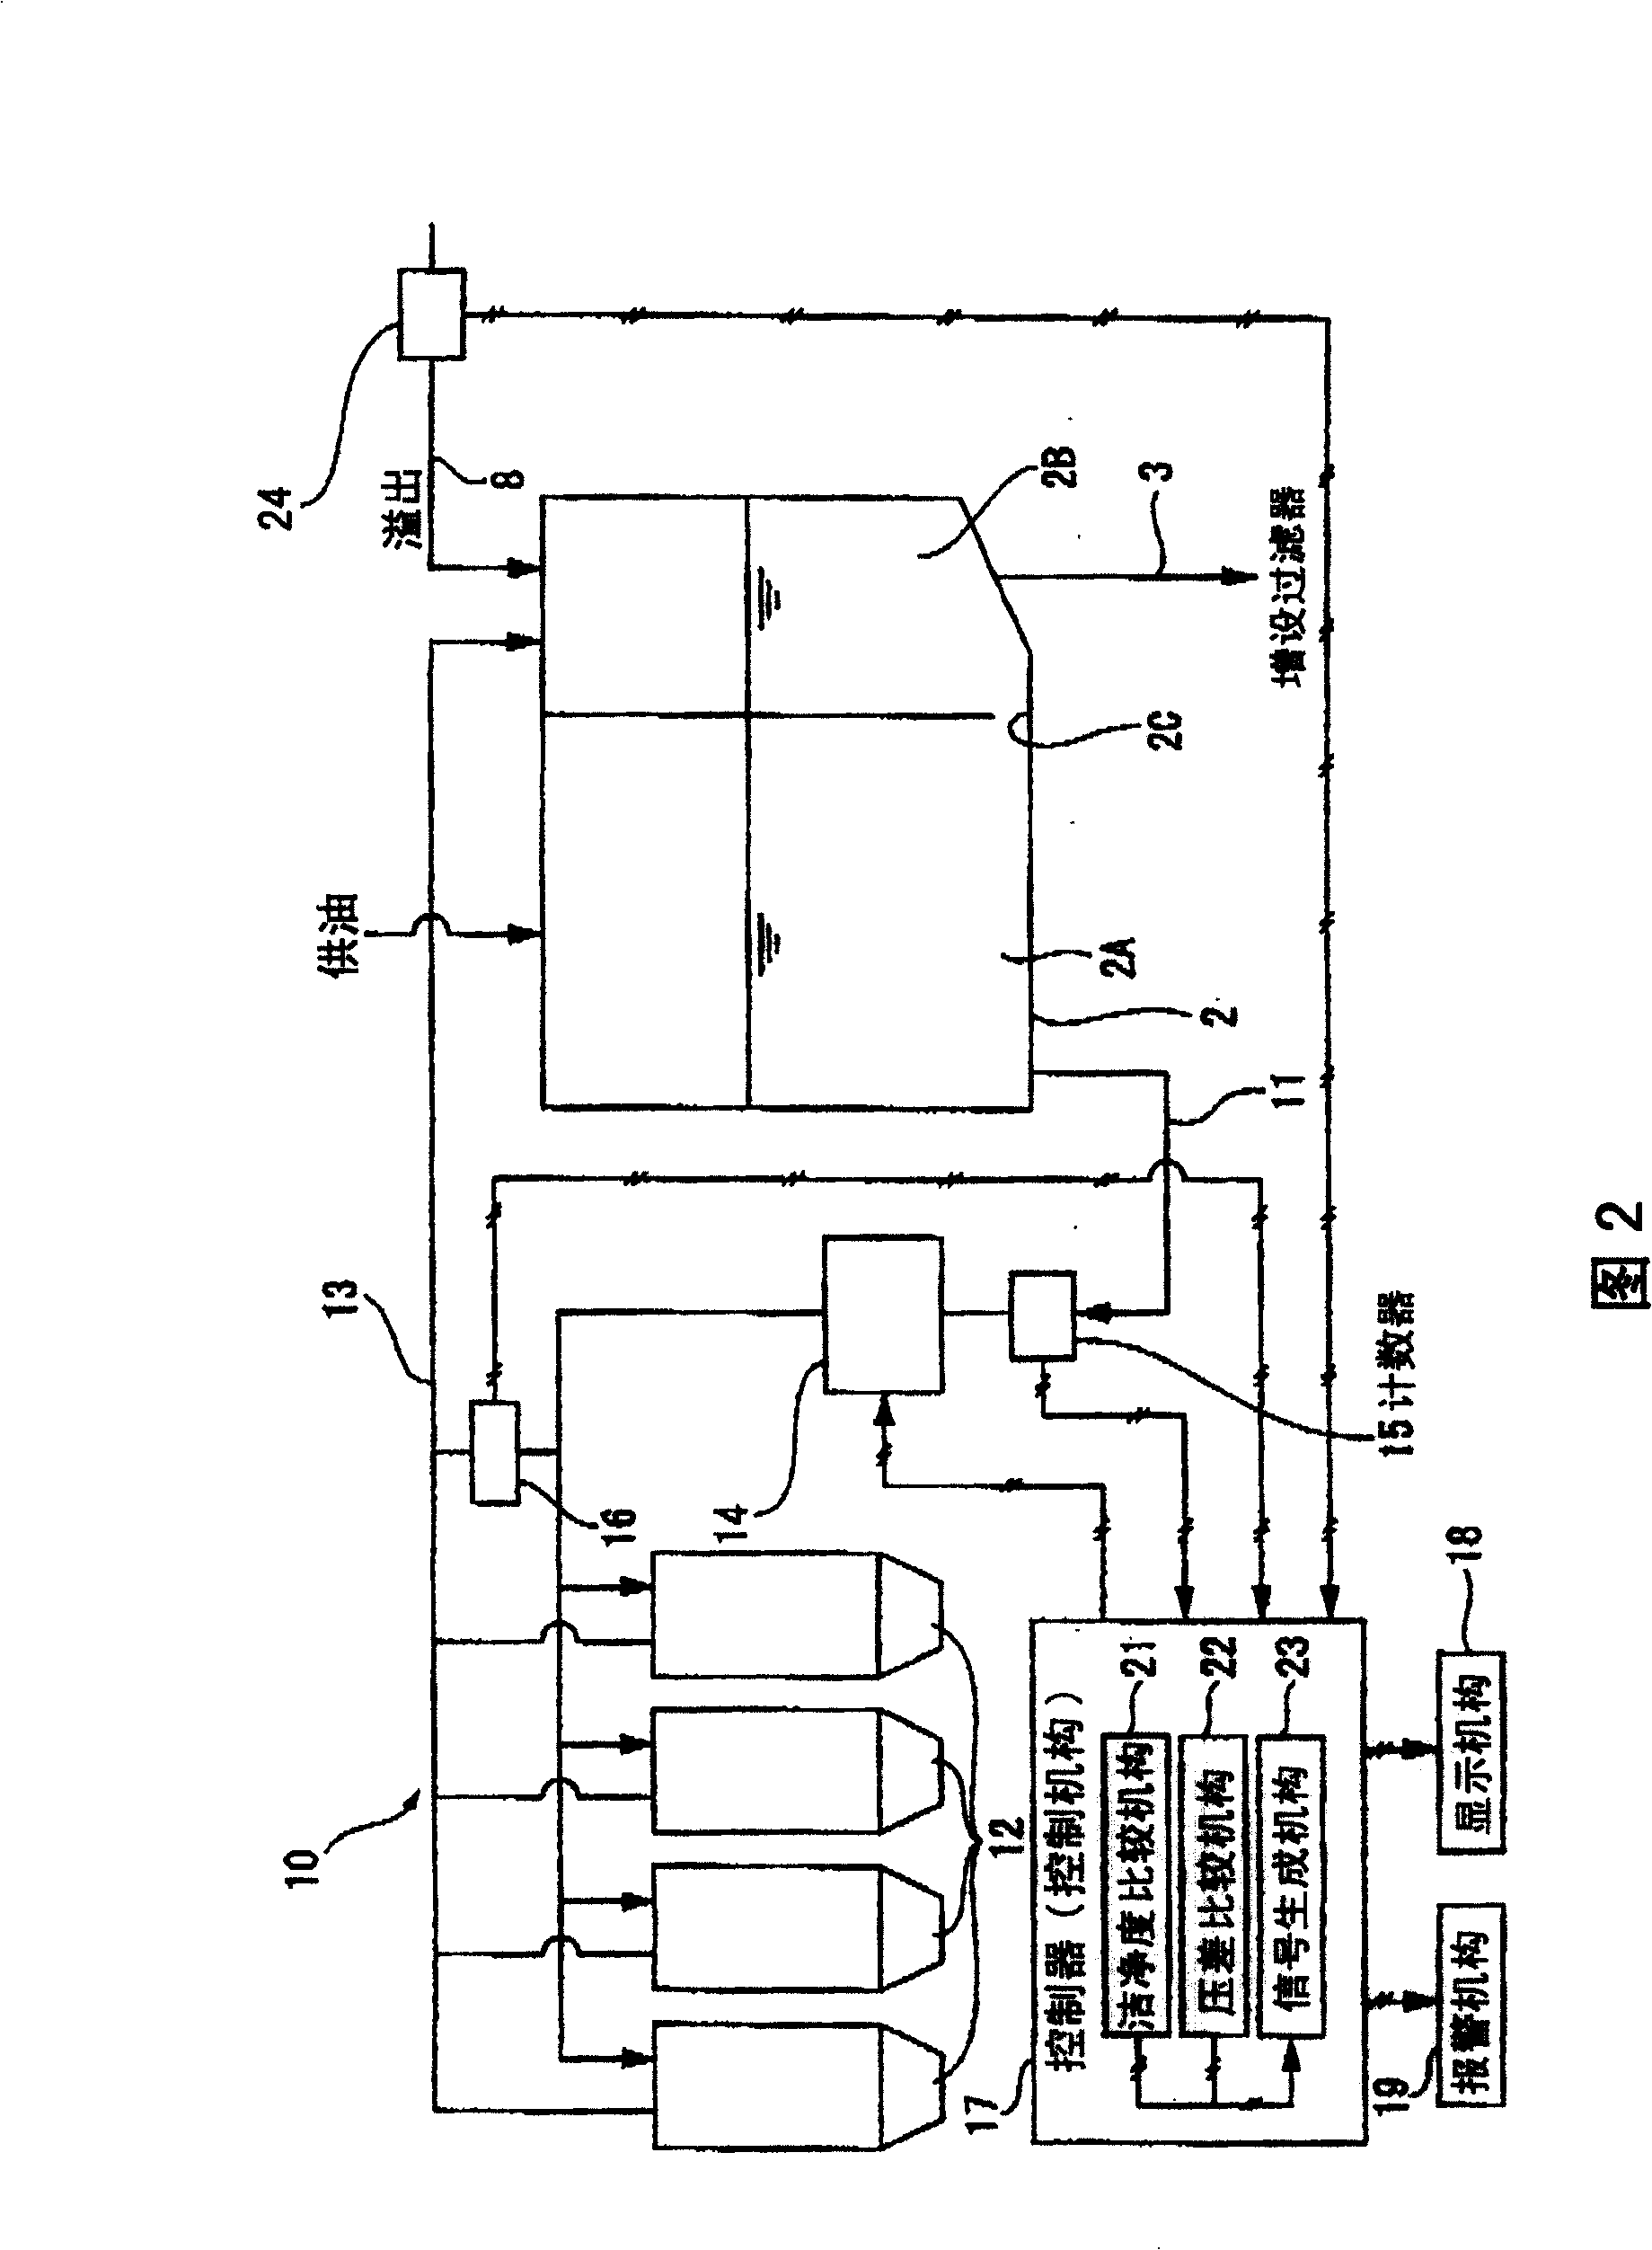 In-tank fuel purifying treatment apparatus